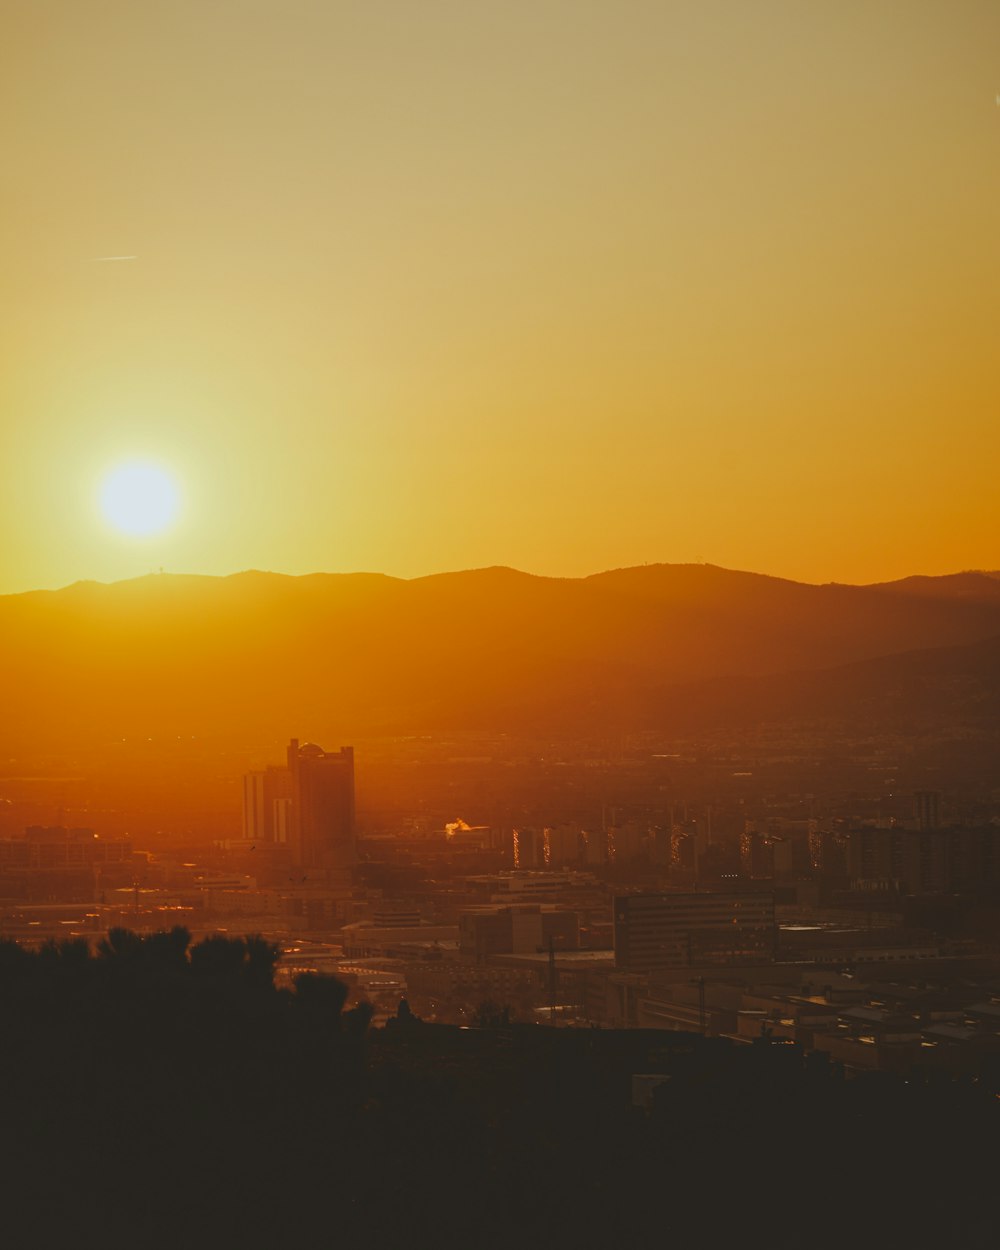 the sun is setting over a city with mountains in the background